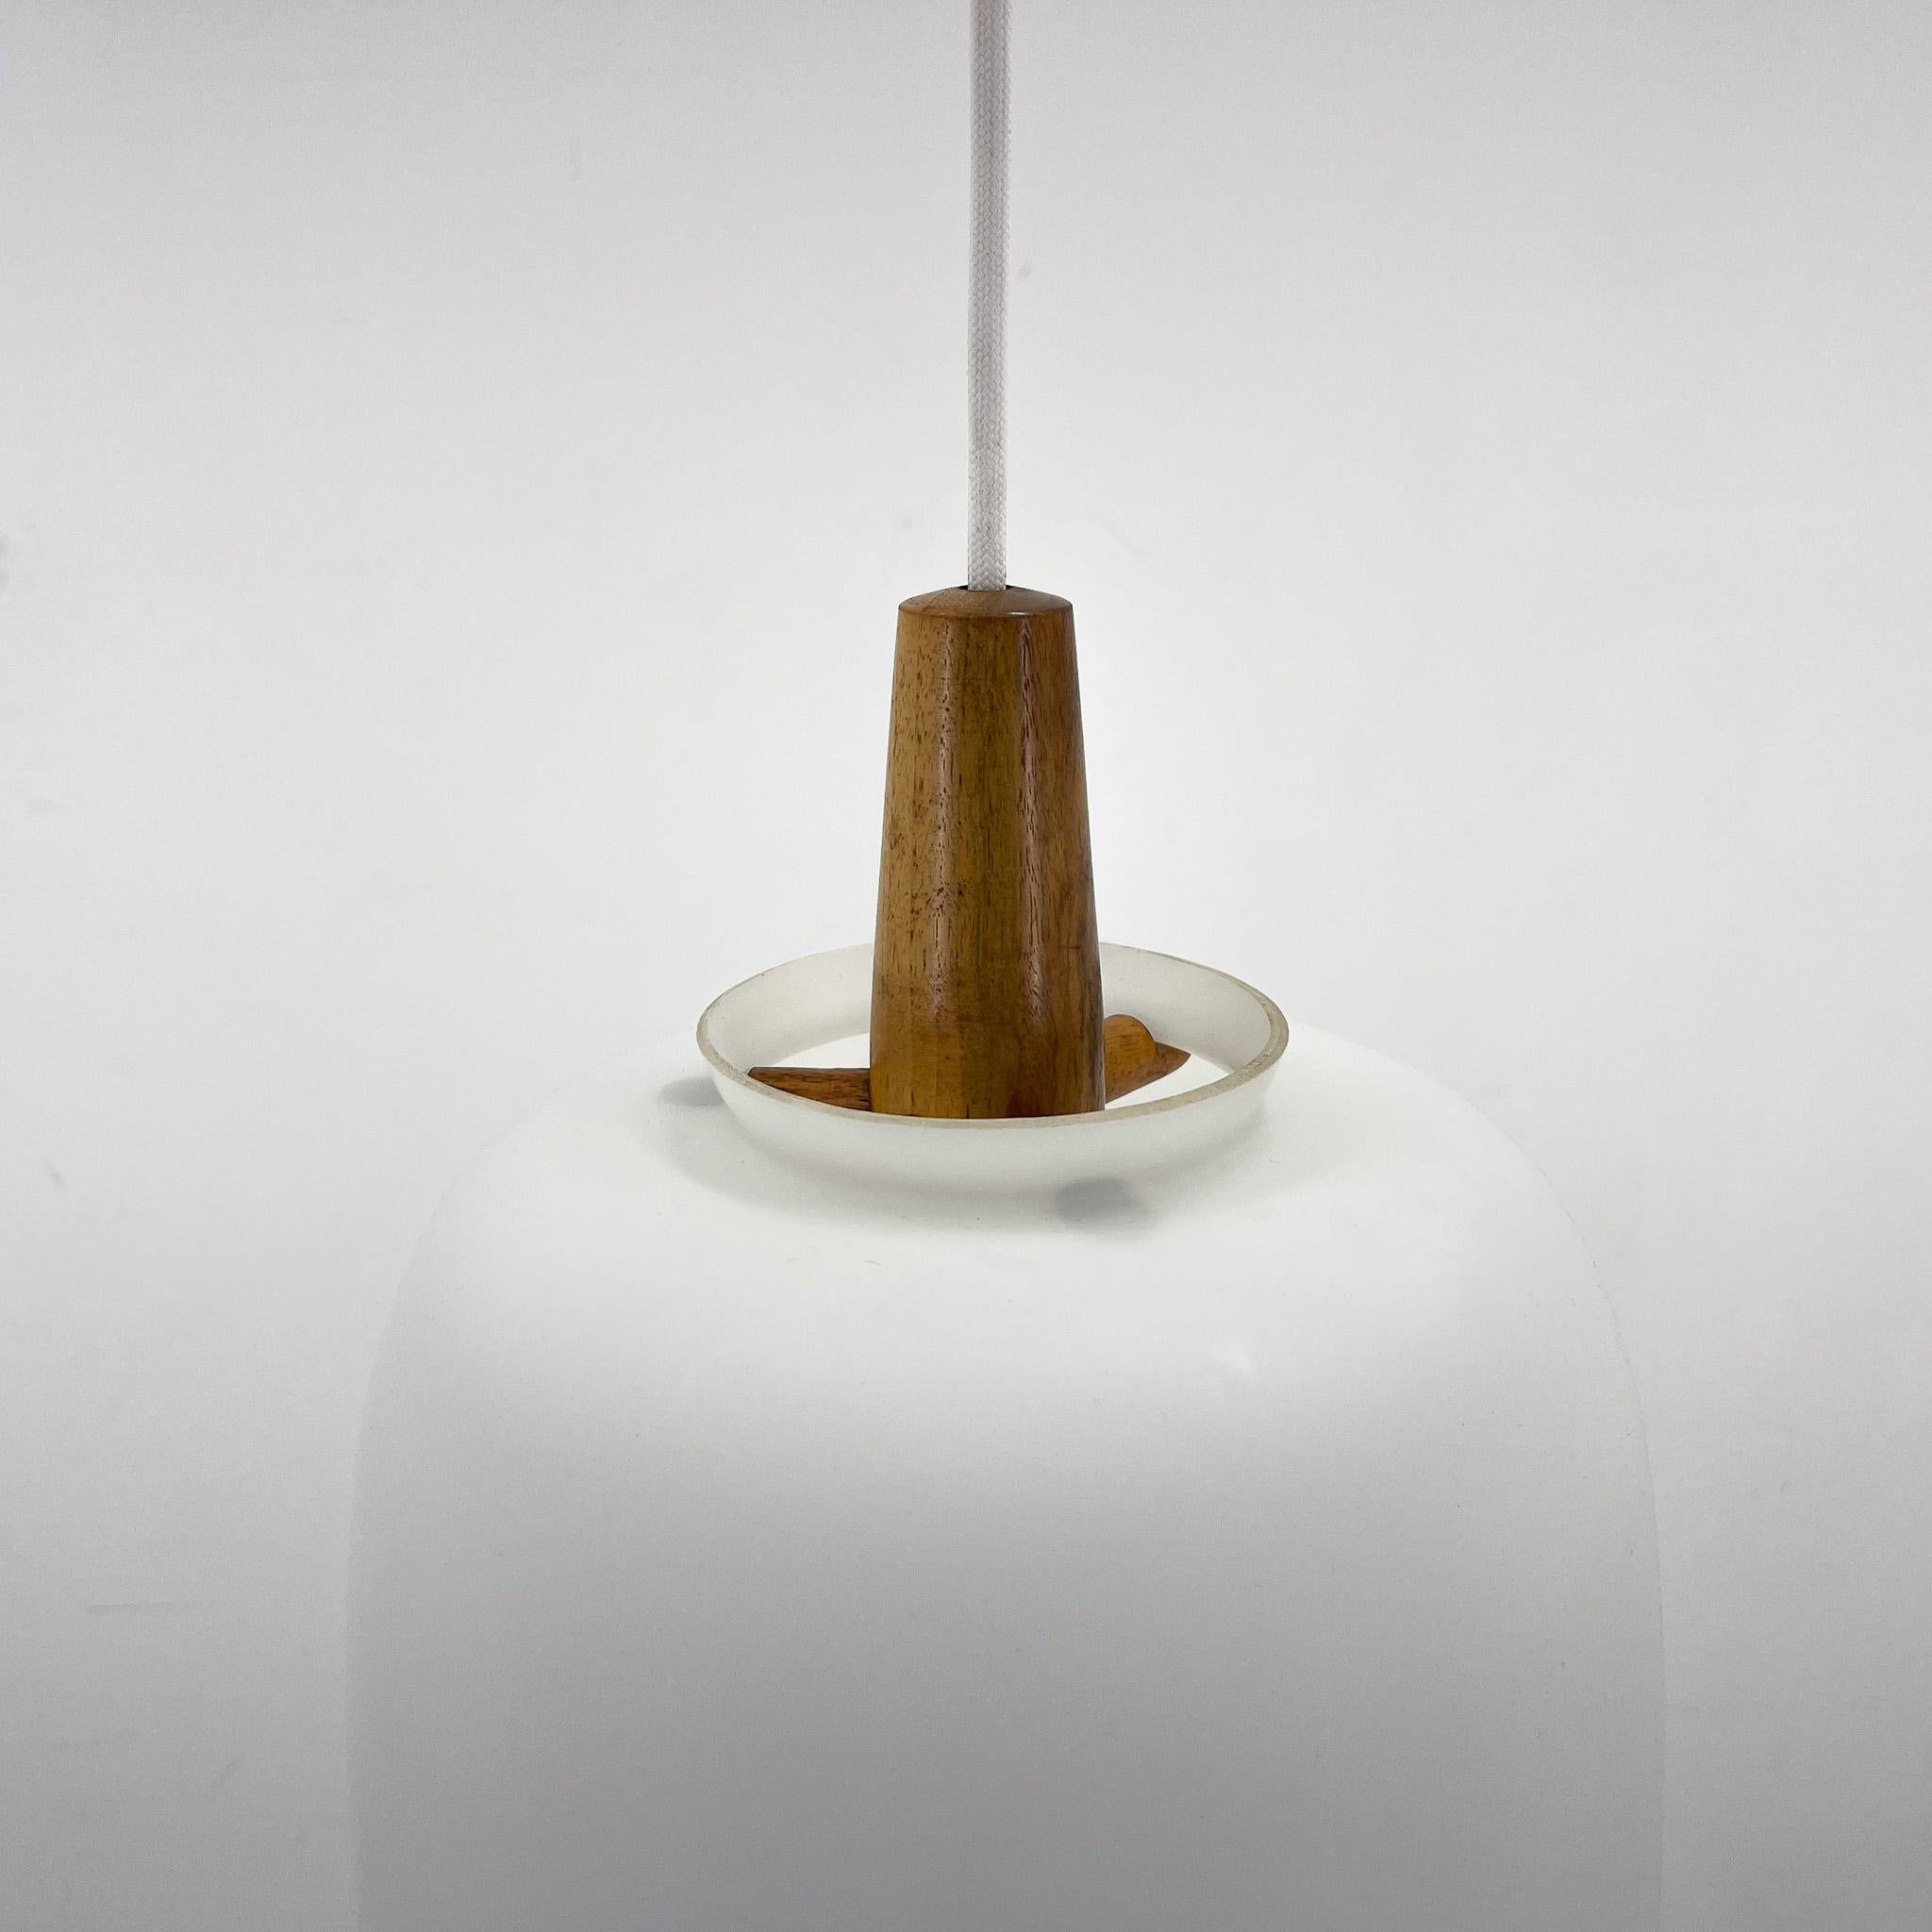 1960s Wood and Glass Pendant Light by ULUV, Czechoslovakia, Marked by Manufactur For Sale 3